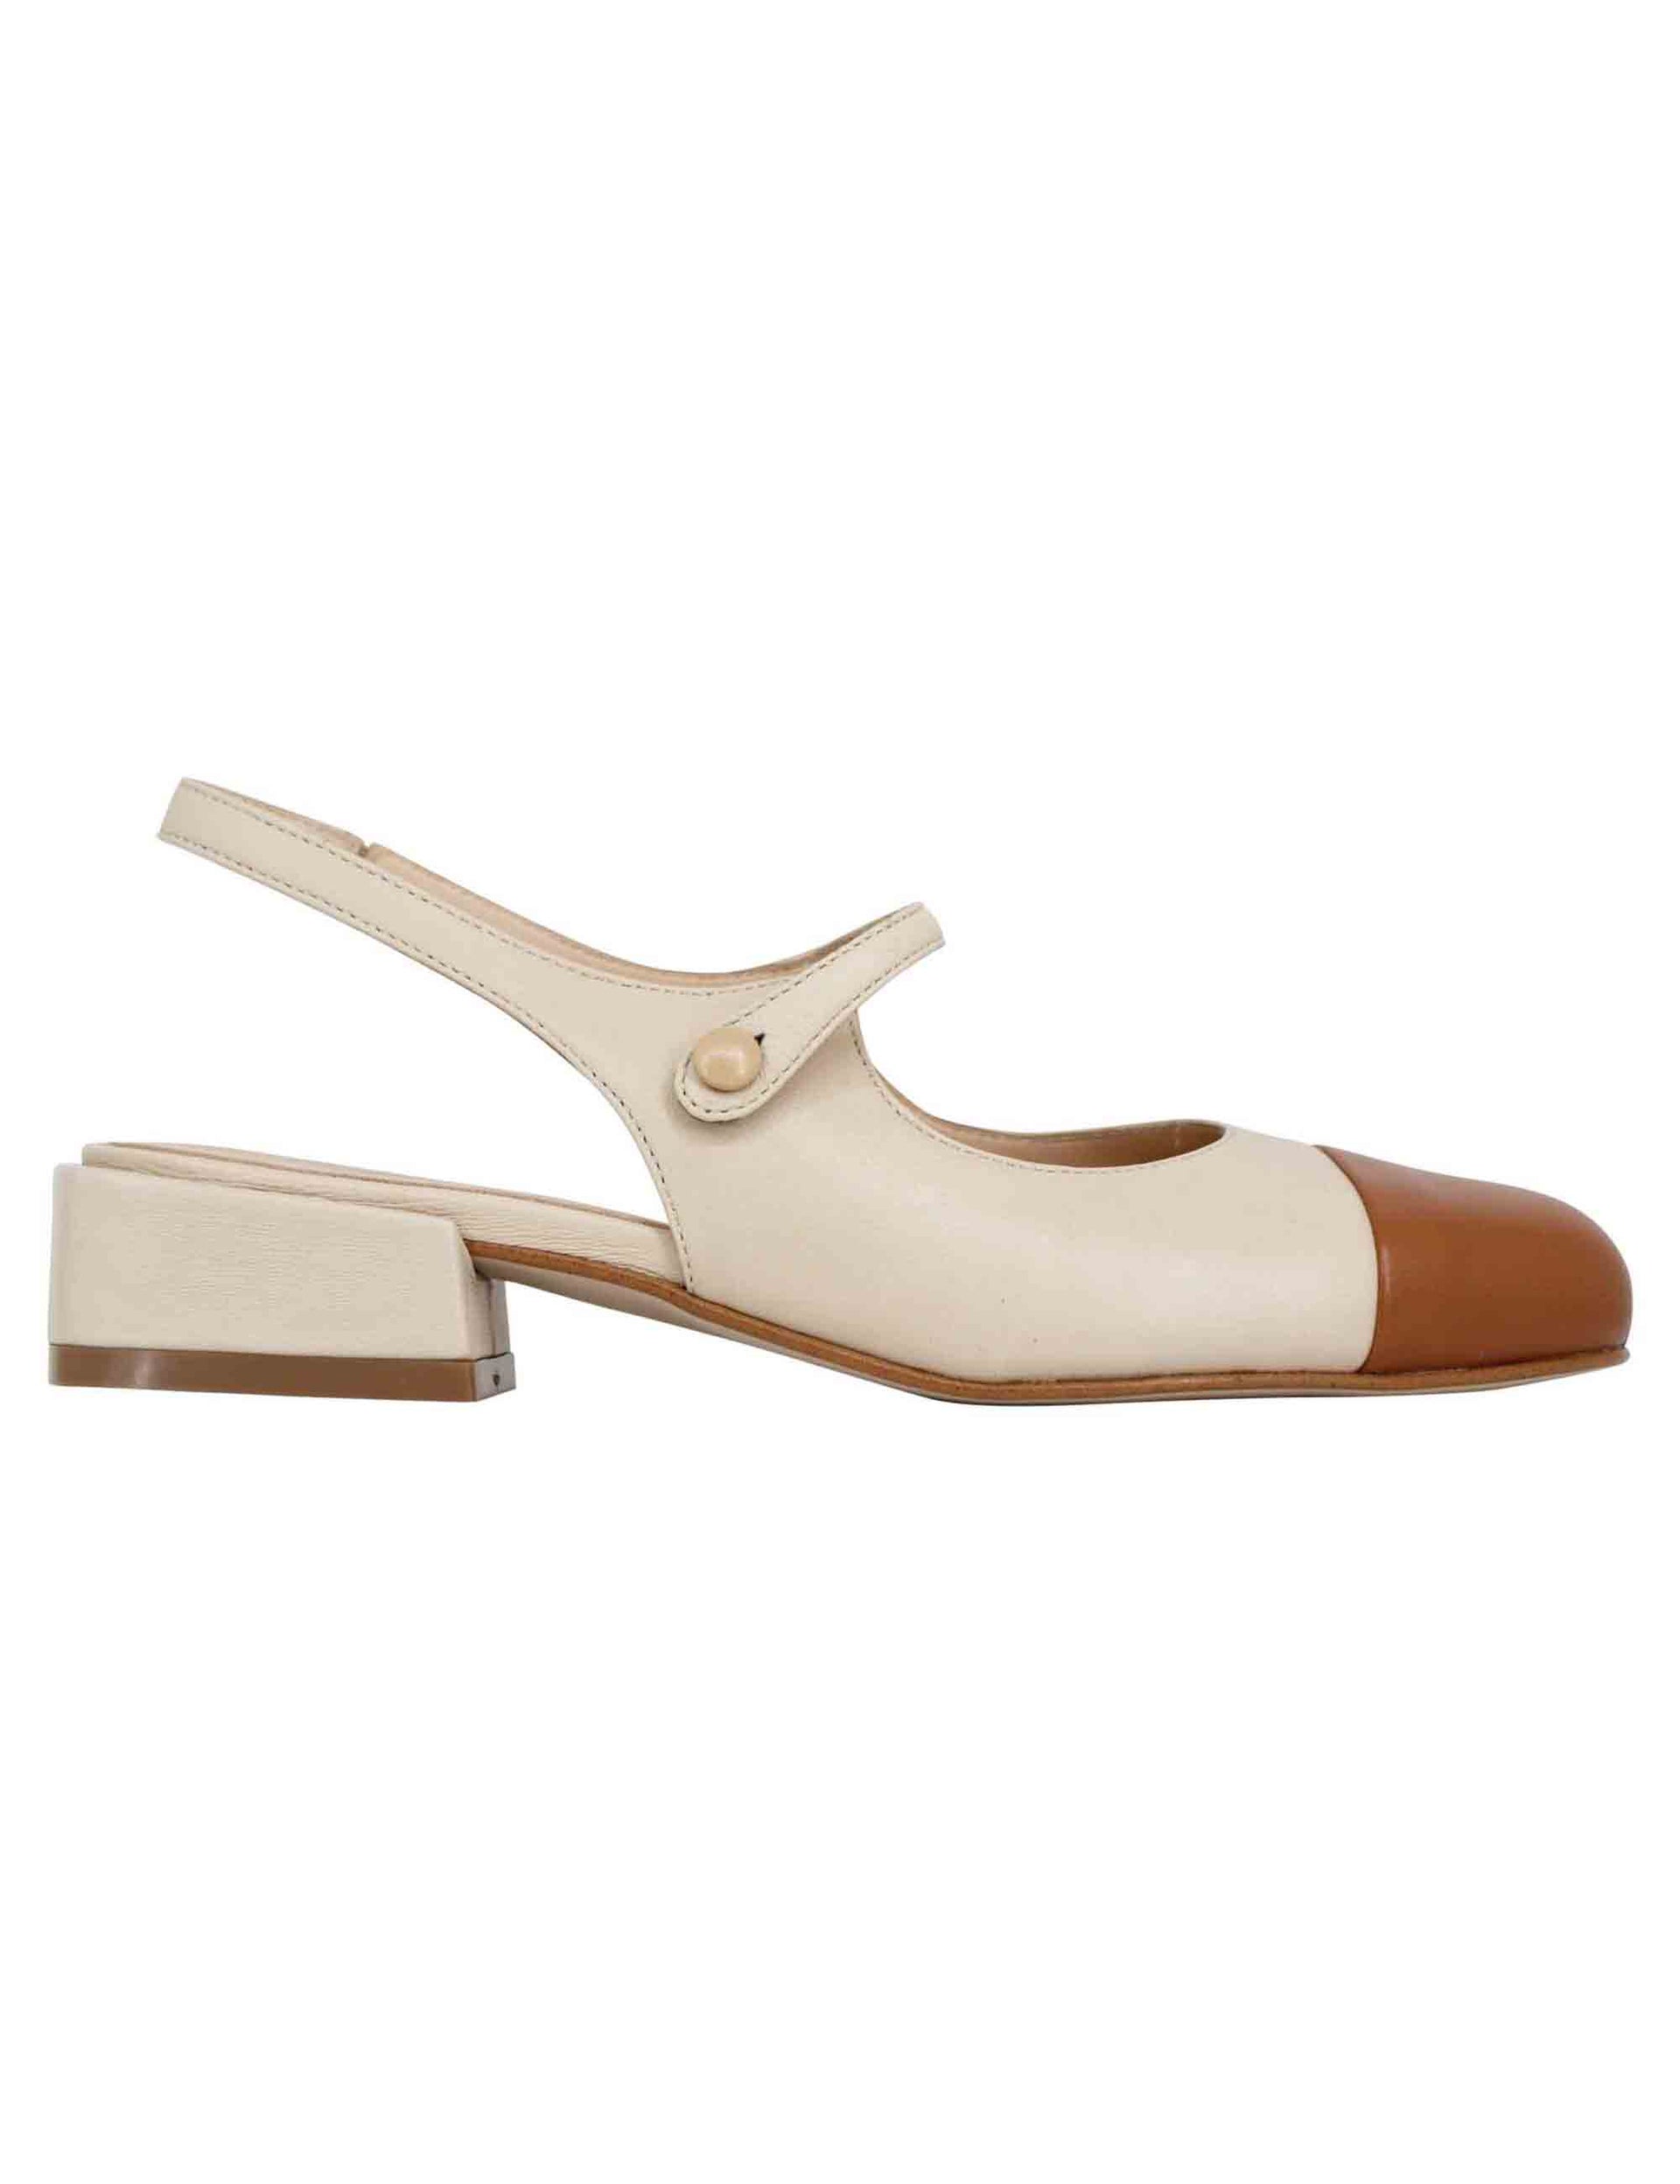 Women's slingback pumps in two-tone beige leather with camel toe cap